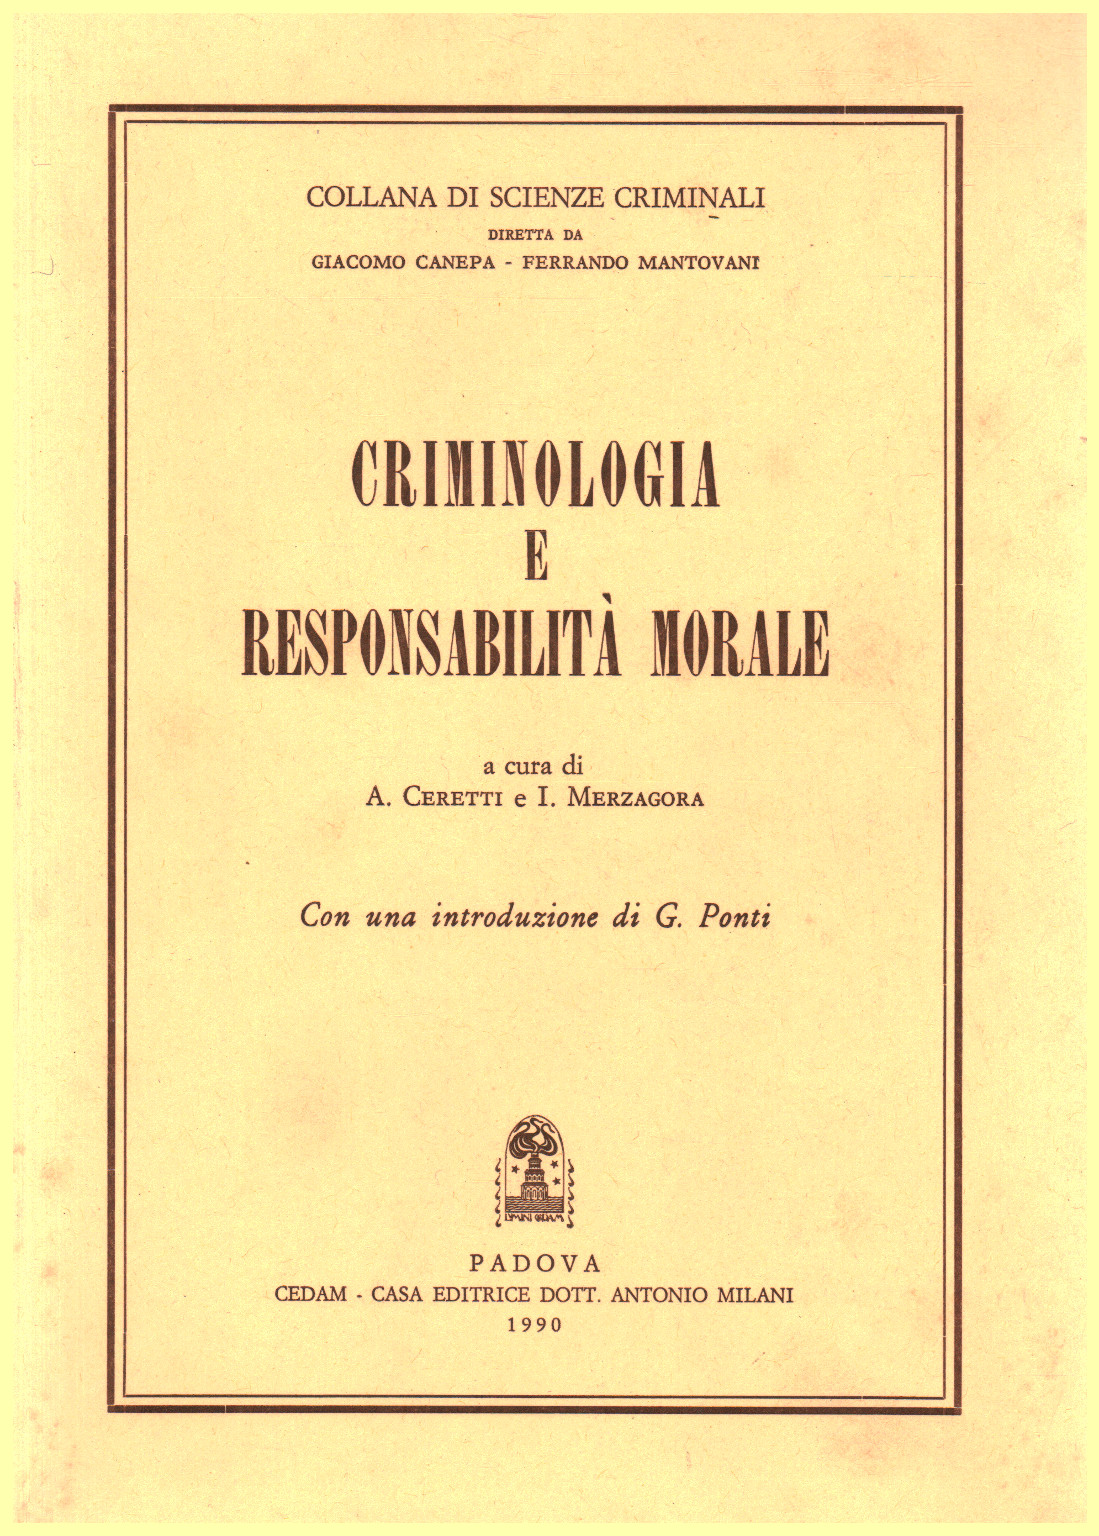 Criminology and moral responsibility